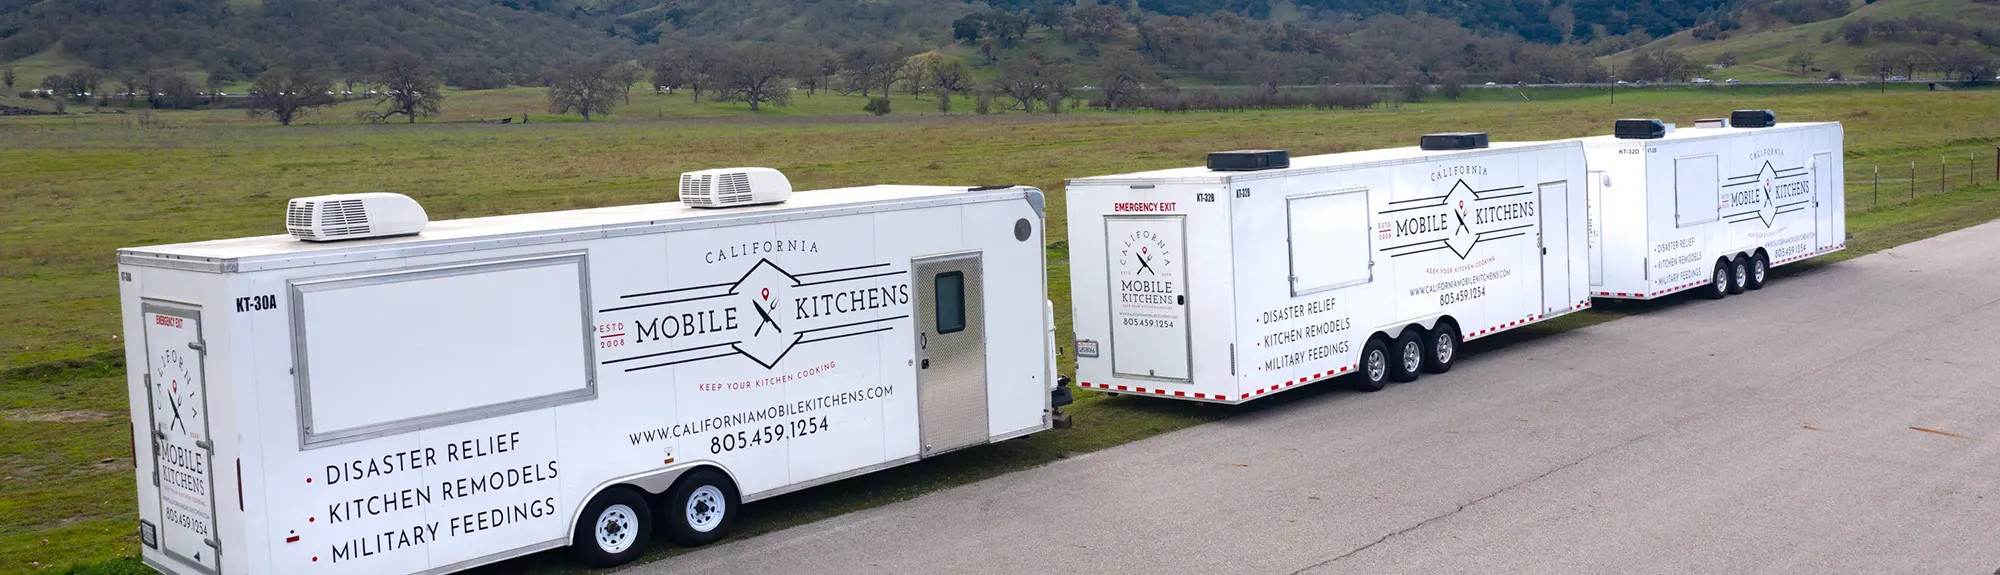 Virginia Mobile Kitchens Help Start Up Catering and Community Food Programs